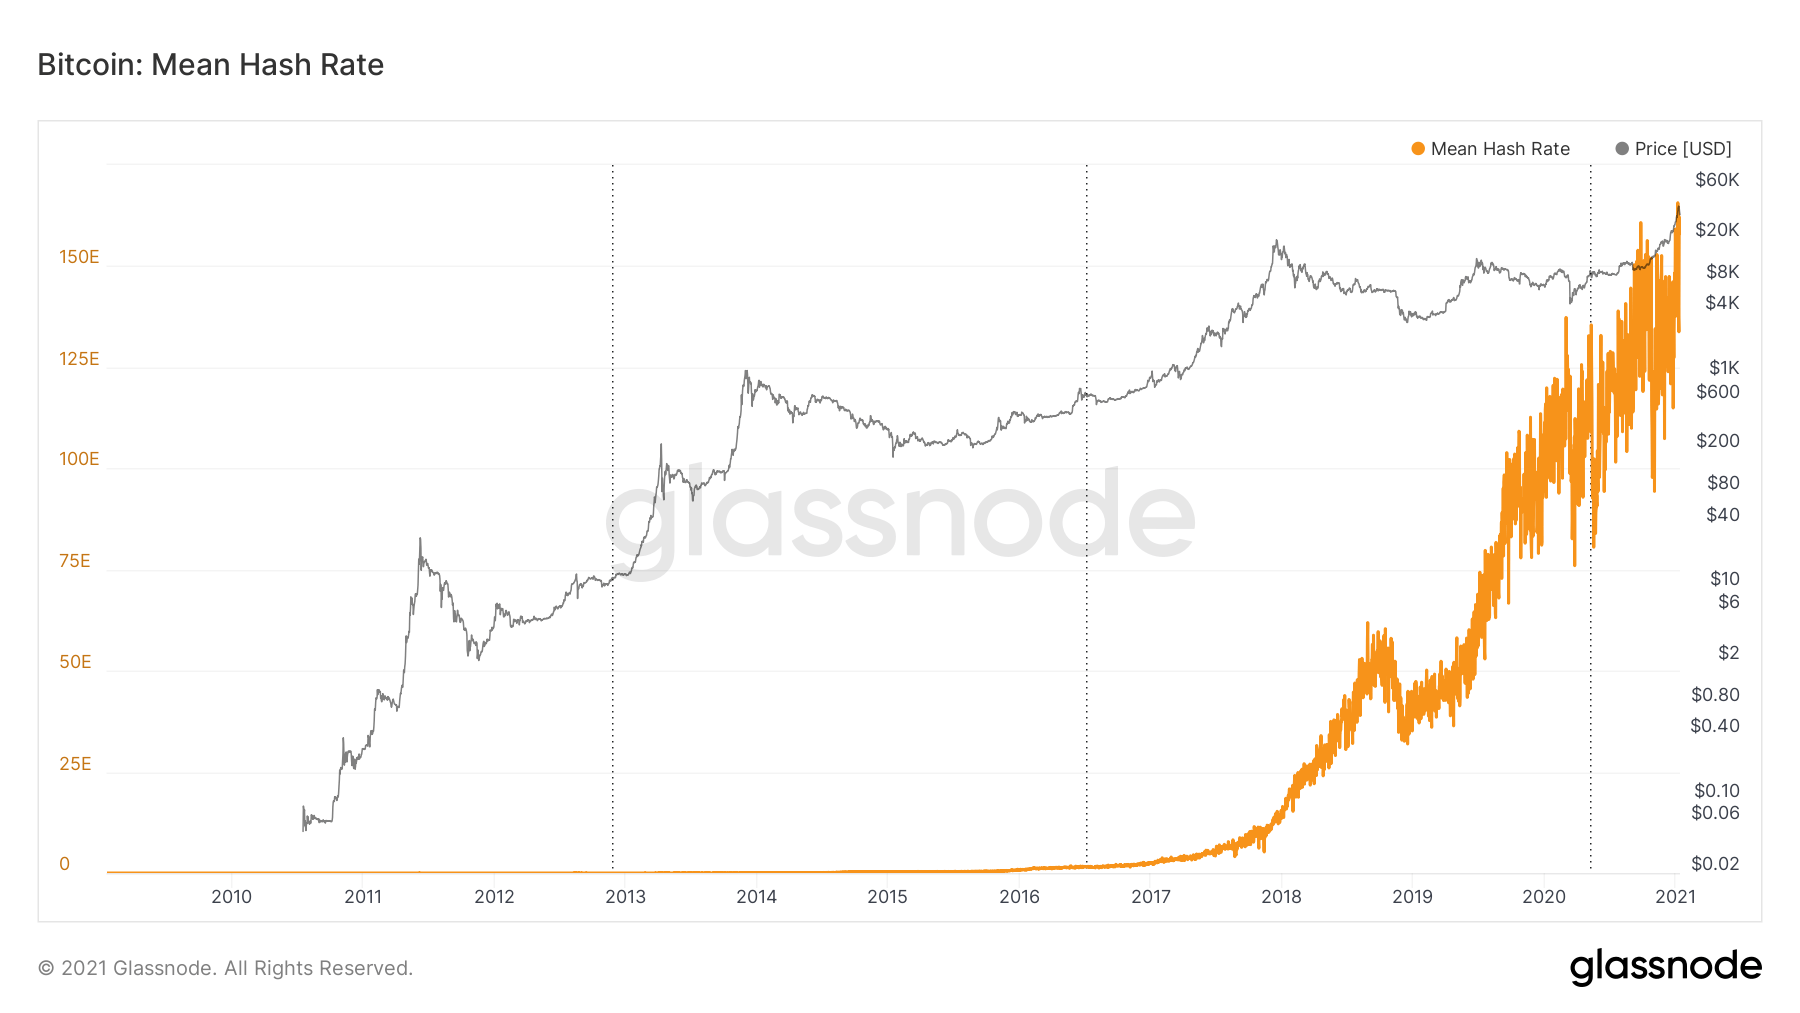 Bitcoin price against mean hash rate